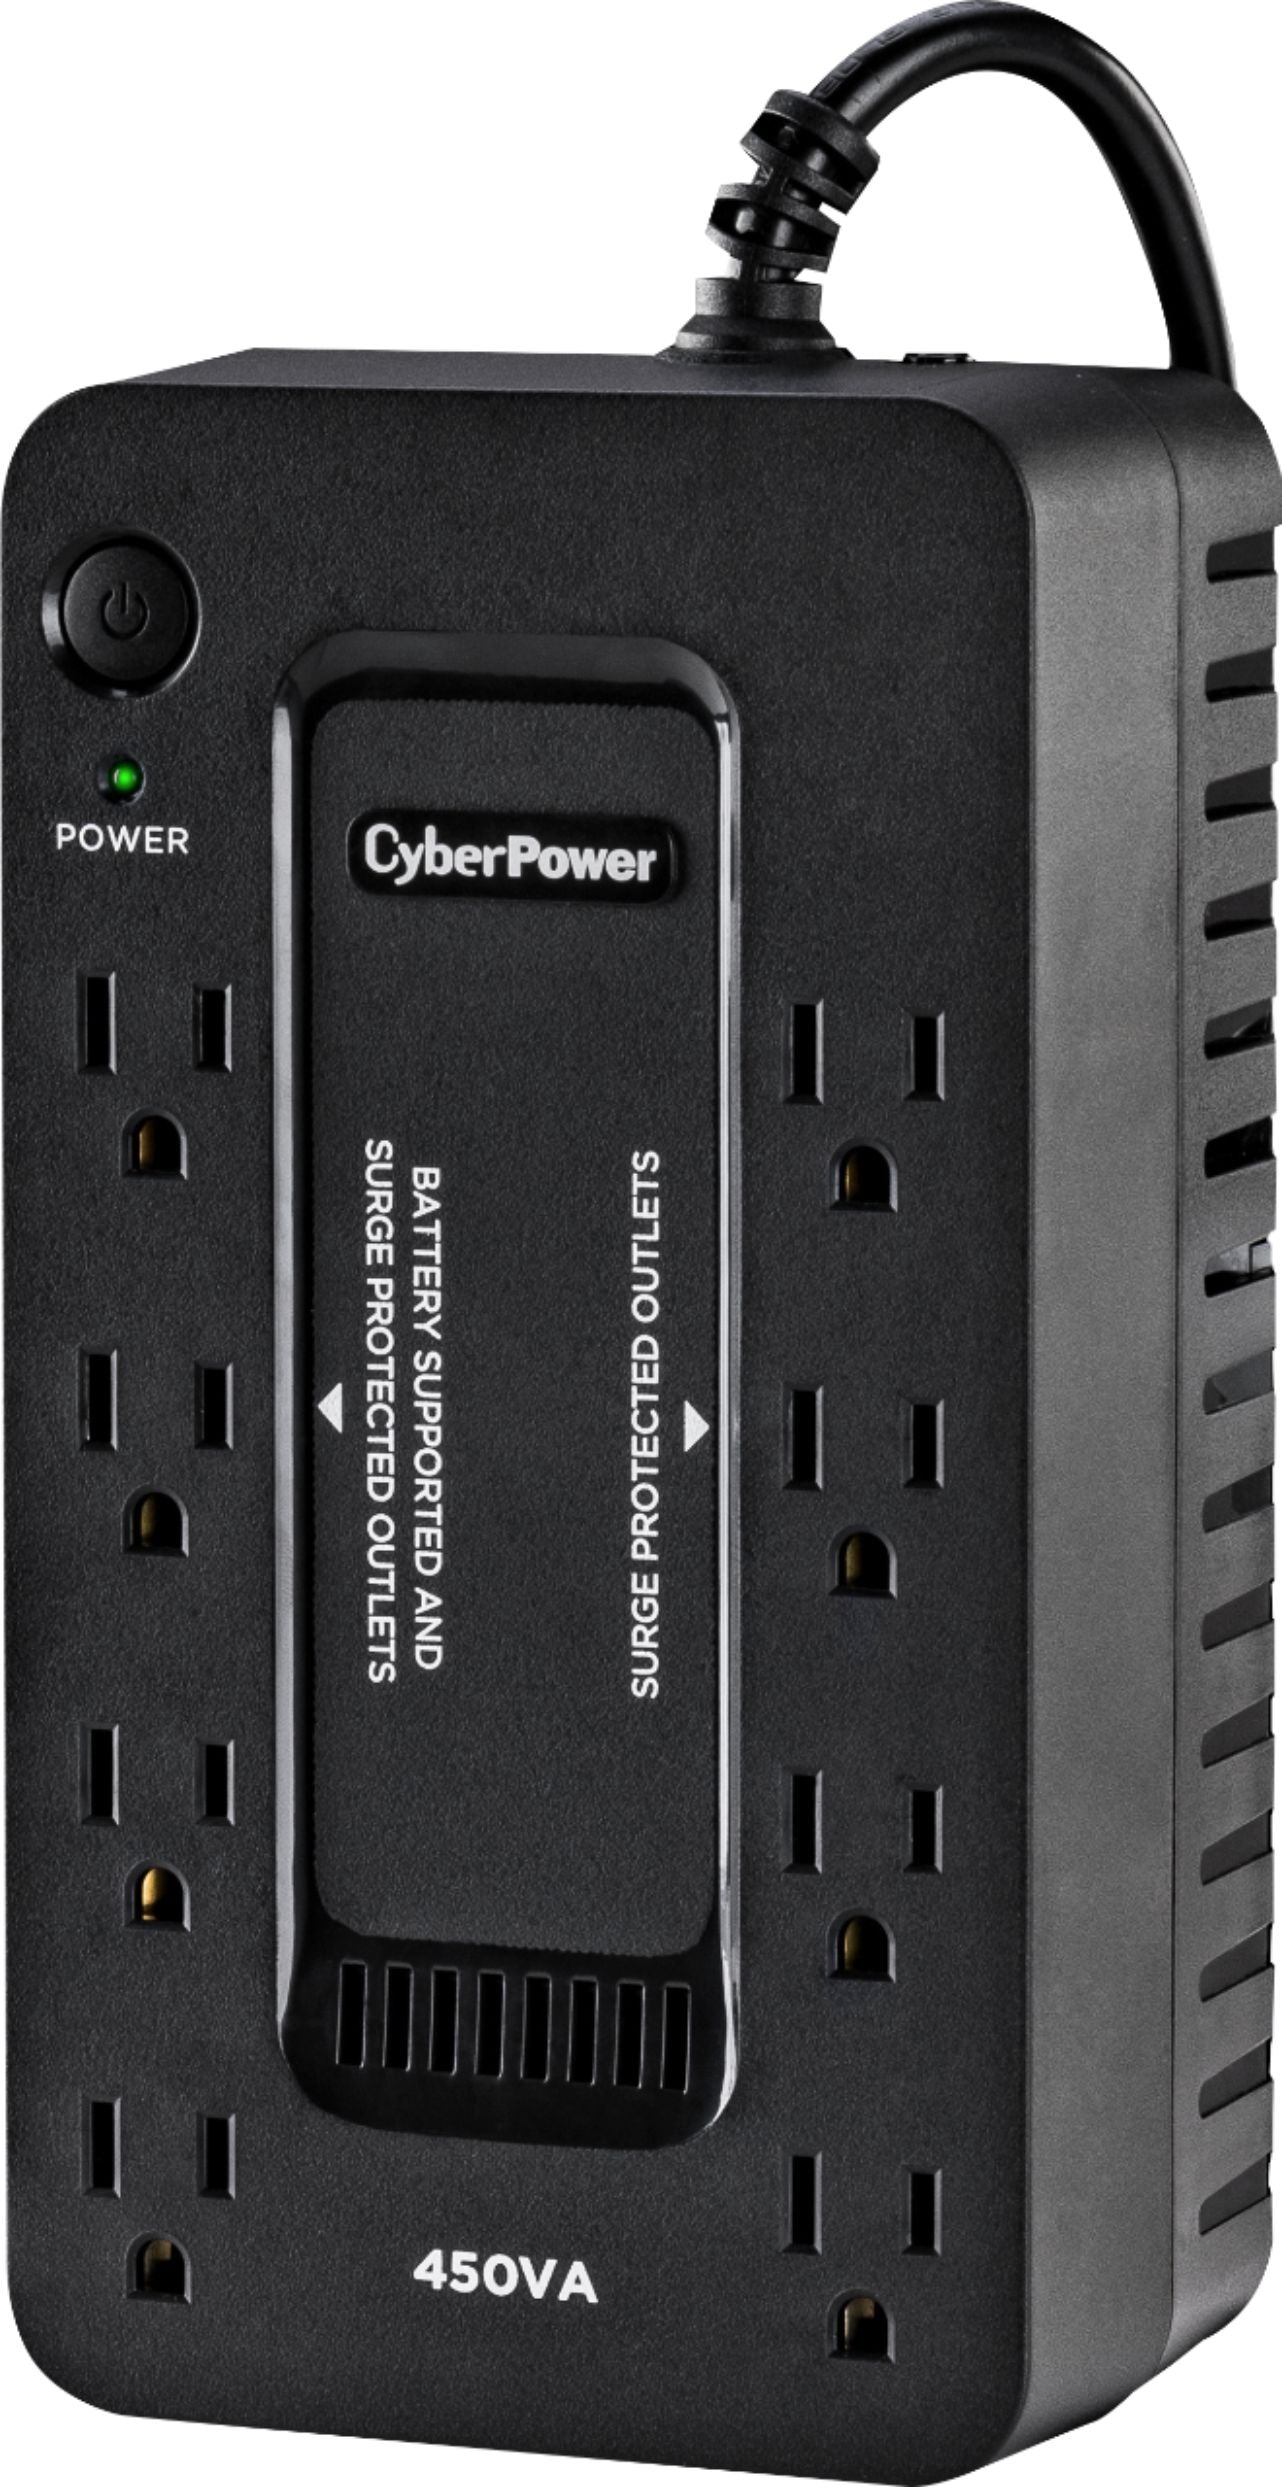 CyberPower SE450G1-R 450VA/260W Battery Back-Up System UPS - New Battery Certified Refurbished